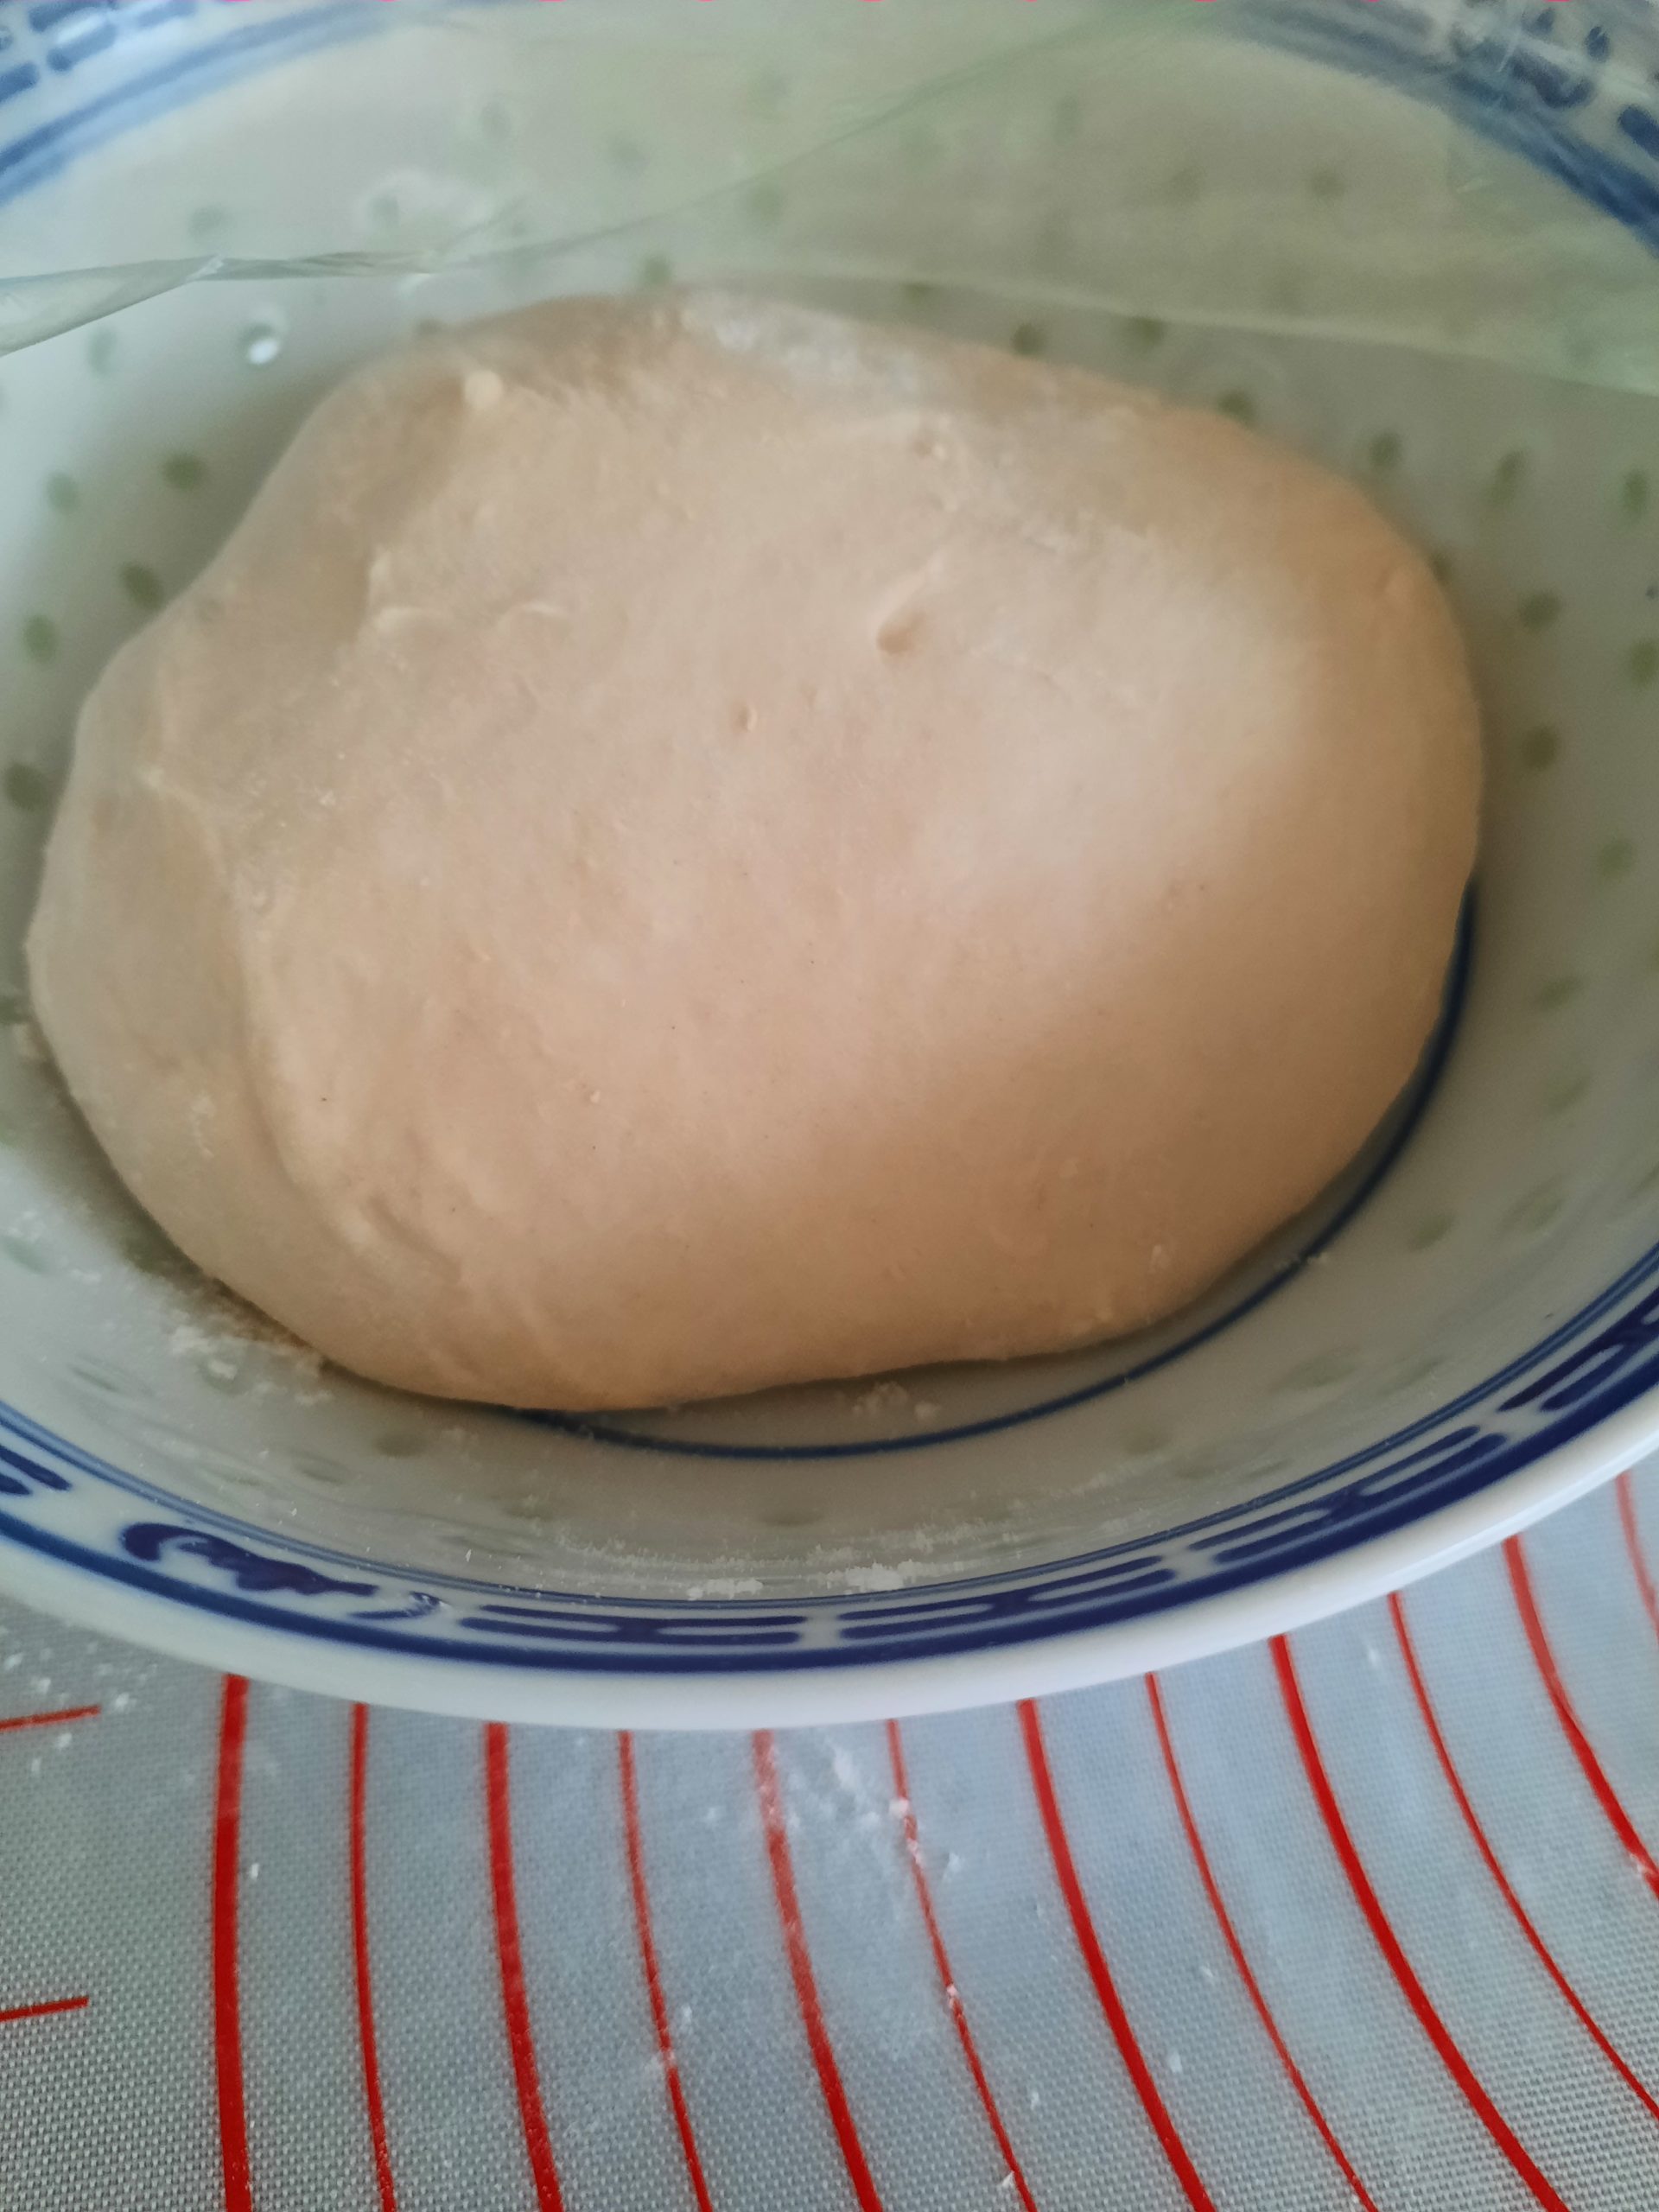 Take the dough out of the mixing bowl. Once dusted with hand flour, fold the dough in half and turn 90 degrees, then fold in half again. Repeat turning, folding in half, finishing to smooth surface. Then start our base fermentation